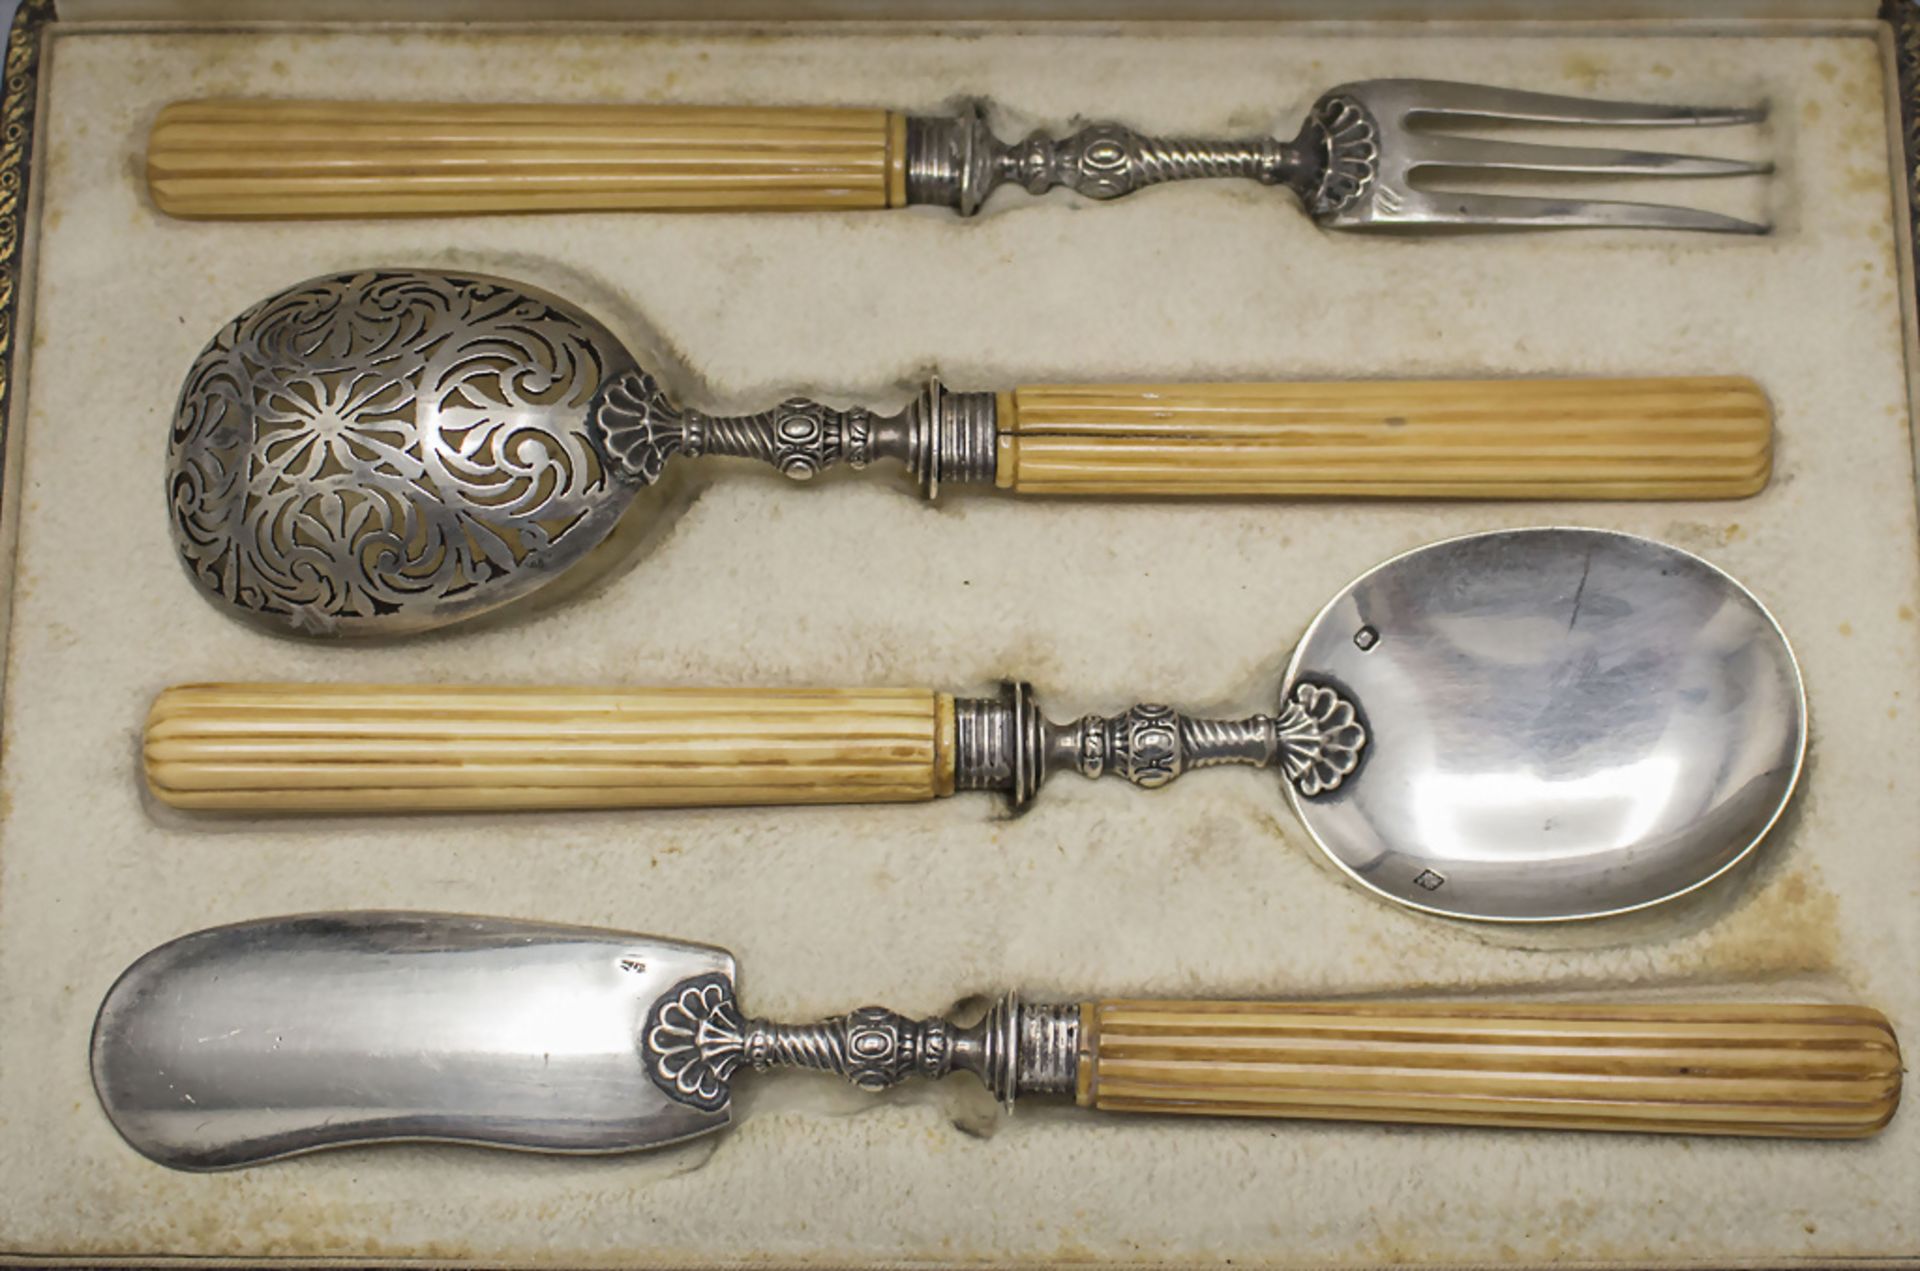 4 Teile Vorlegebesteck im Etui / A set of 4 pieces of silver serving cutlery with box, ...